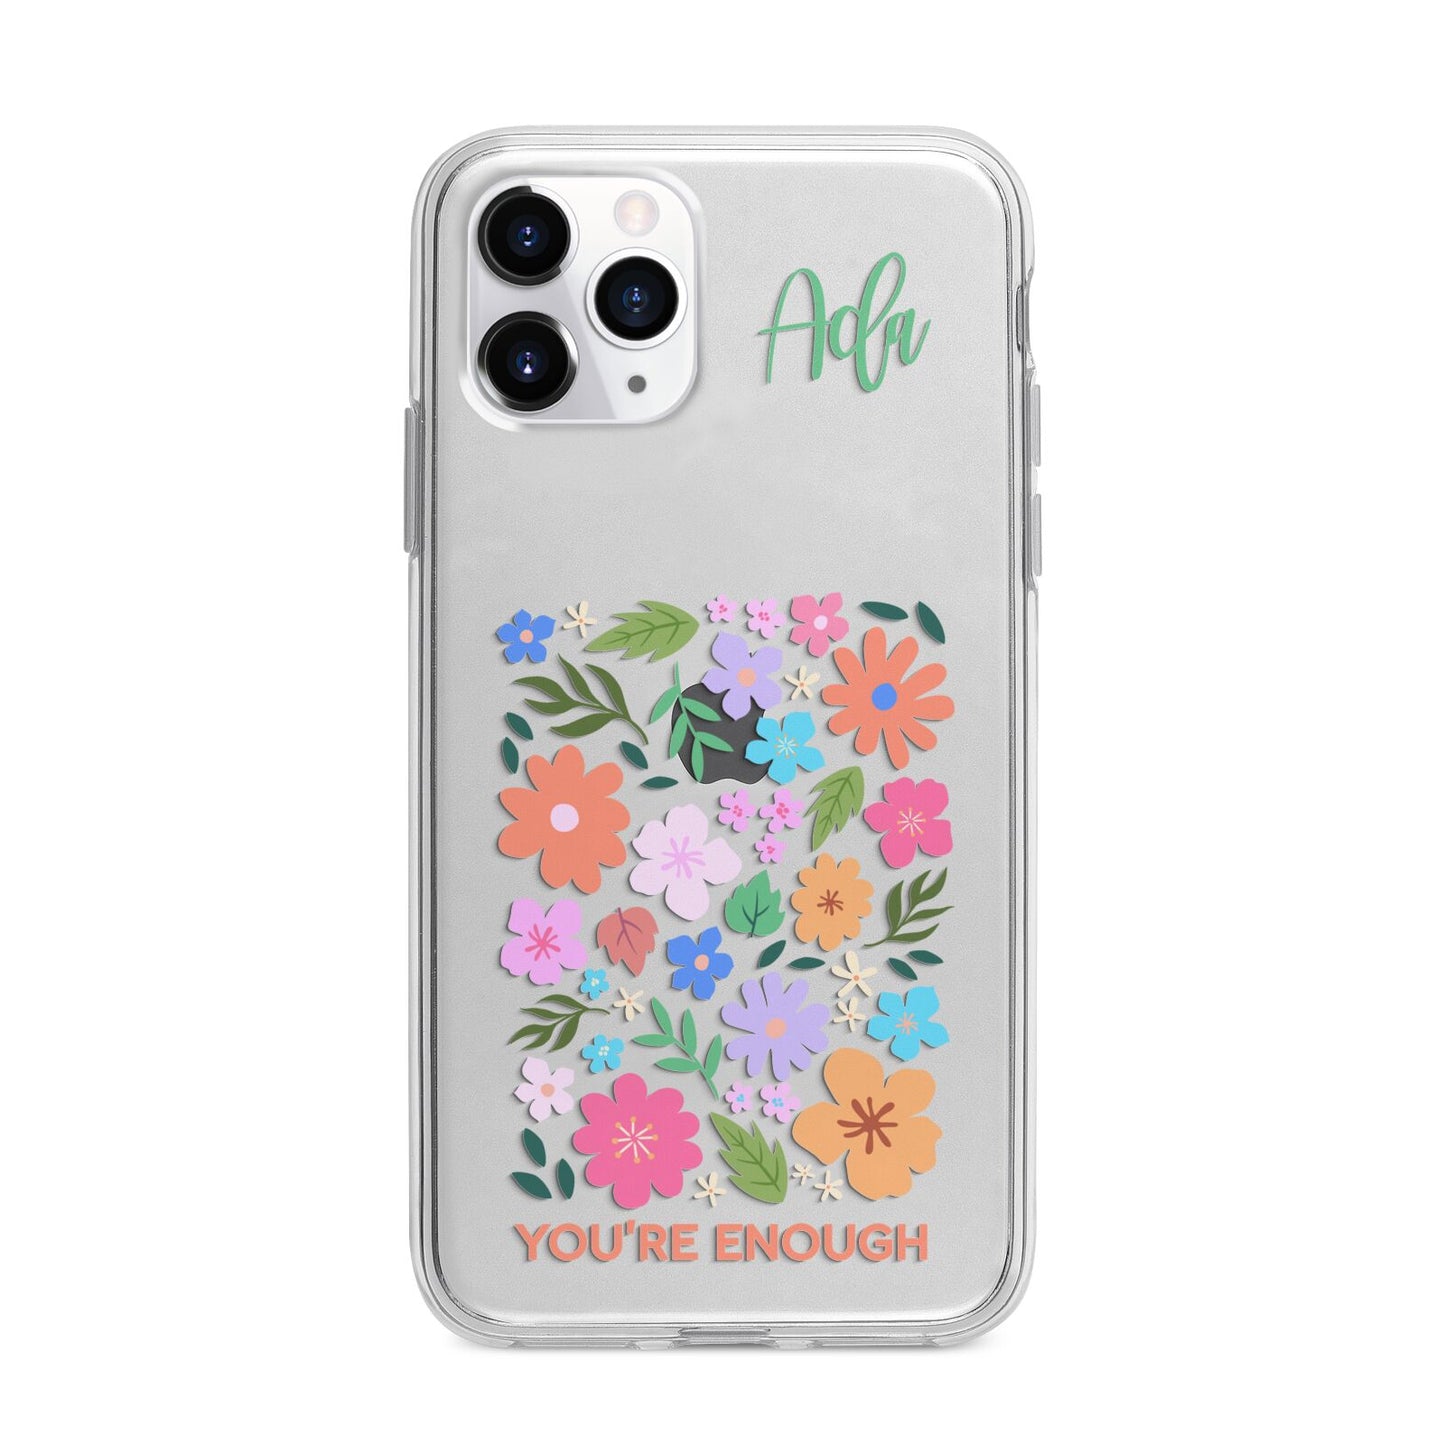 Floral Poster Apple iPhone 11 Pro Max in Silver with Bumper Case